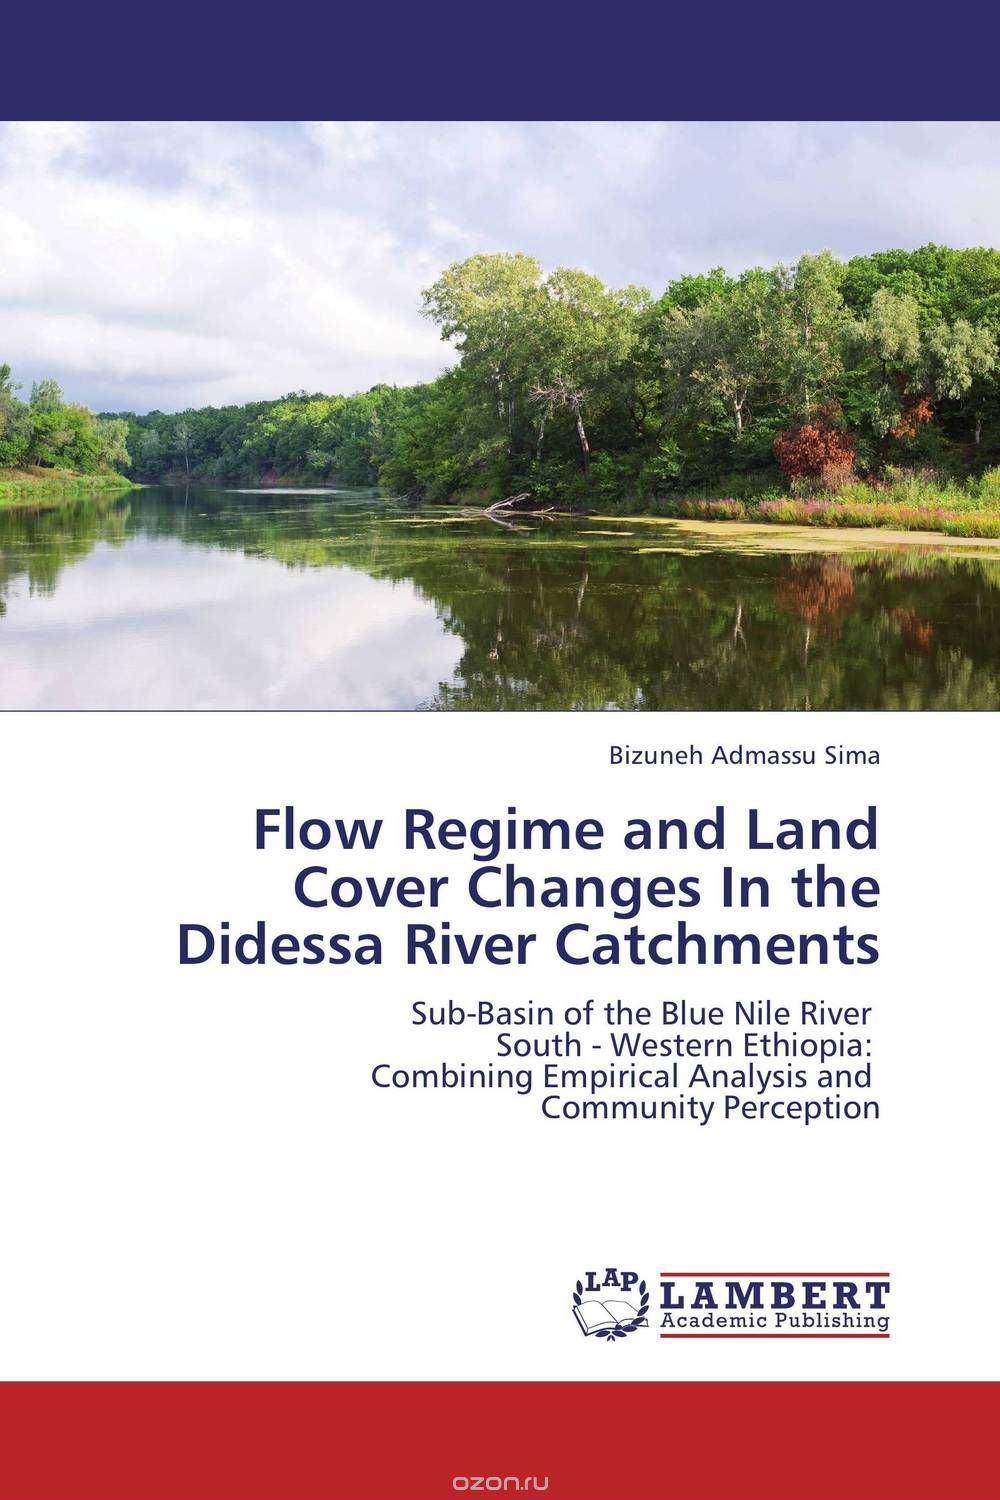 Скачать книгу "Flow Regime and Land Cover Changes  In the Didessa River Catchments"